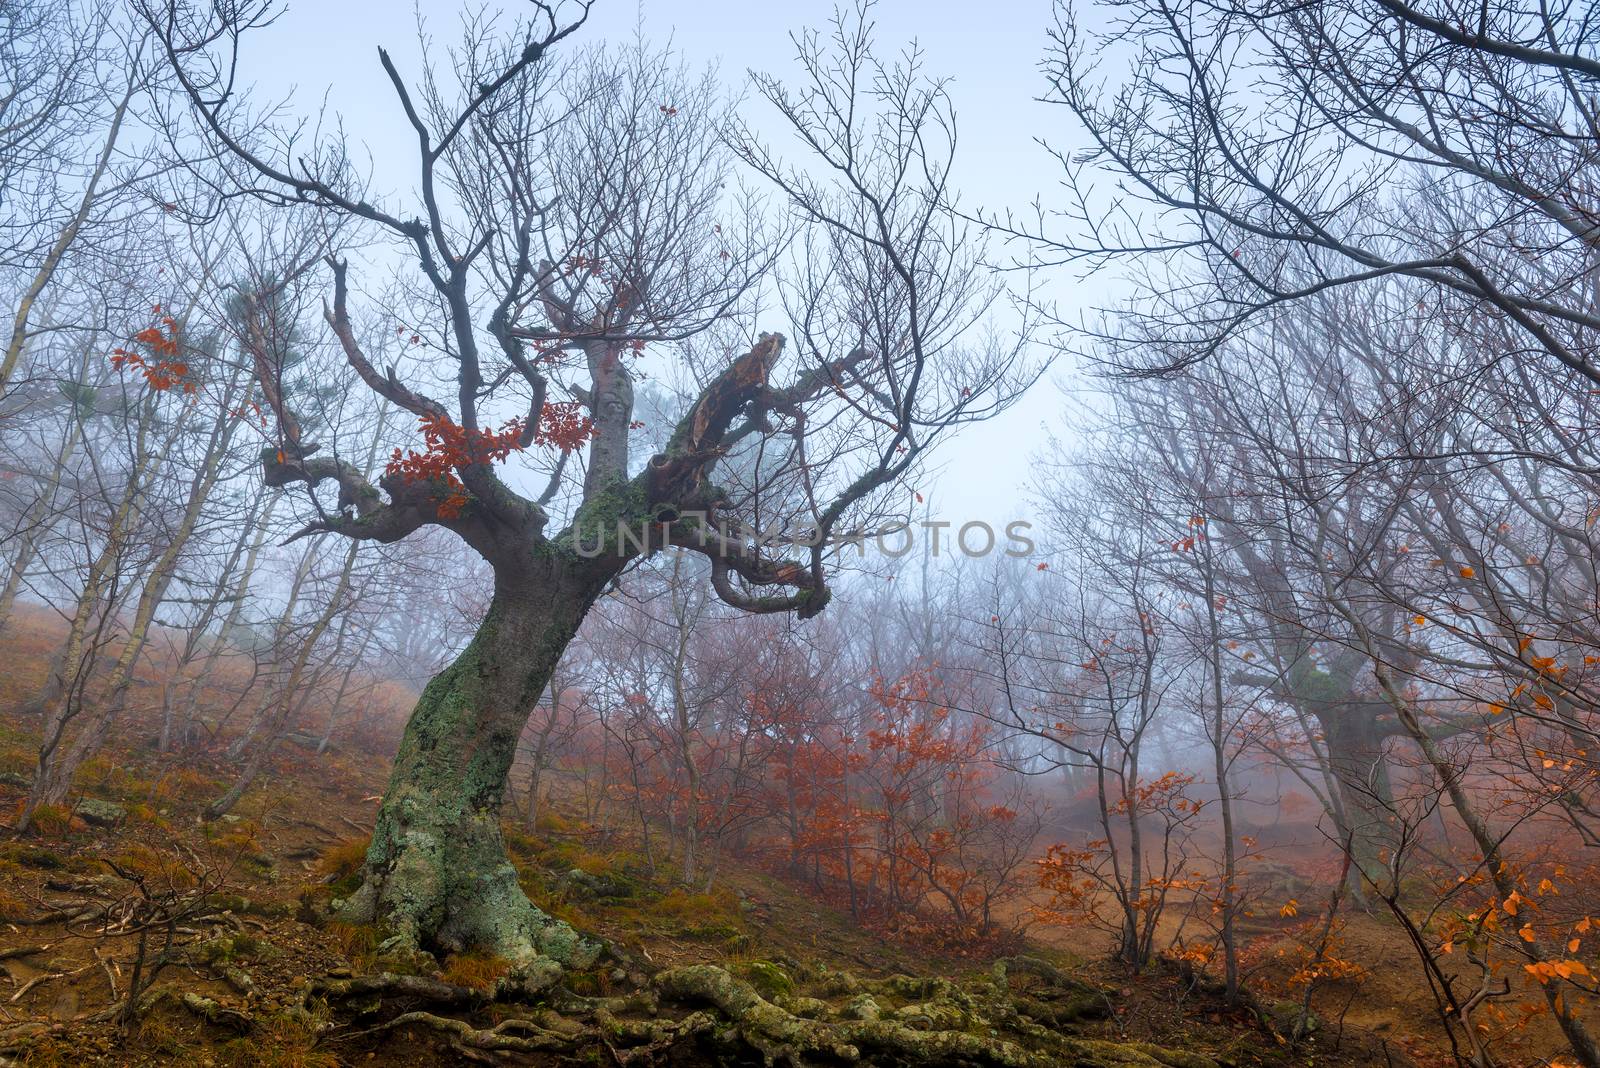 Mystical old tree snag without leaves on a foggy autumn day in the mountains, gloomy landscape